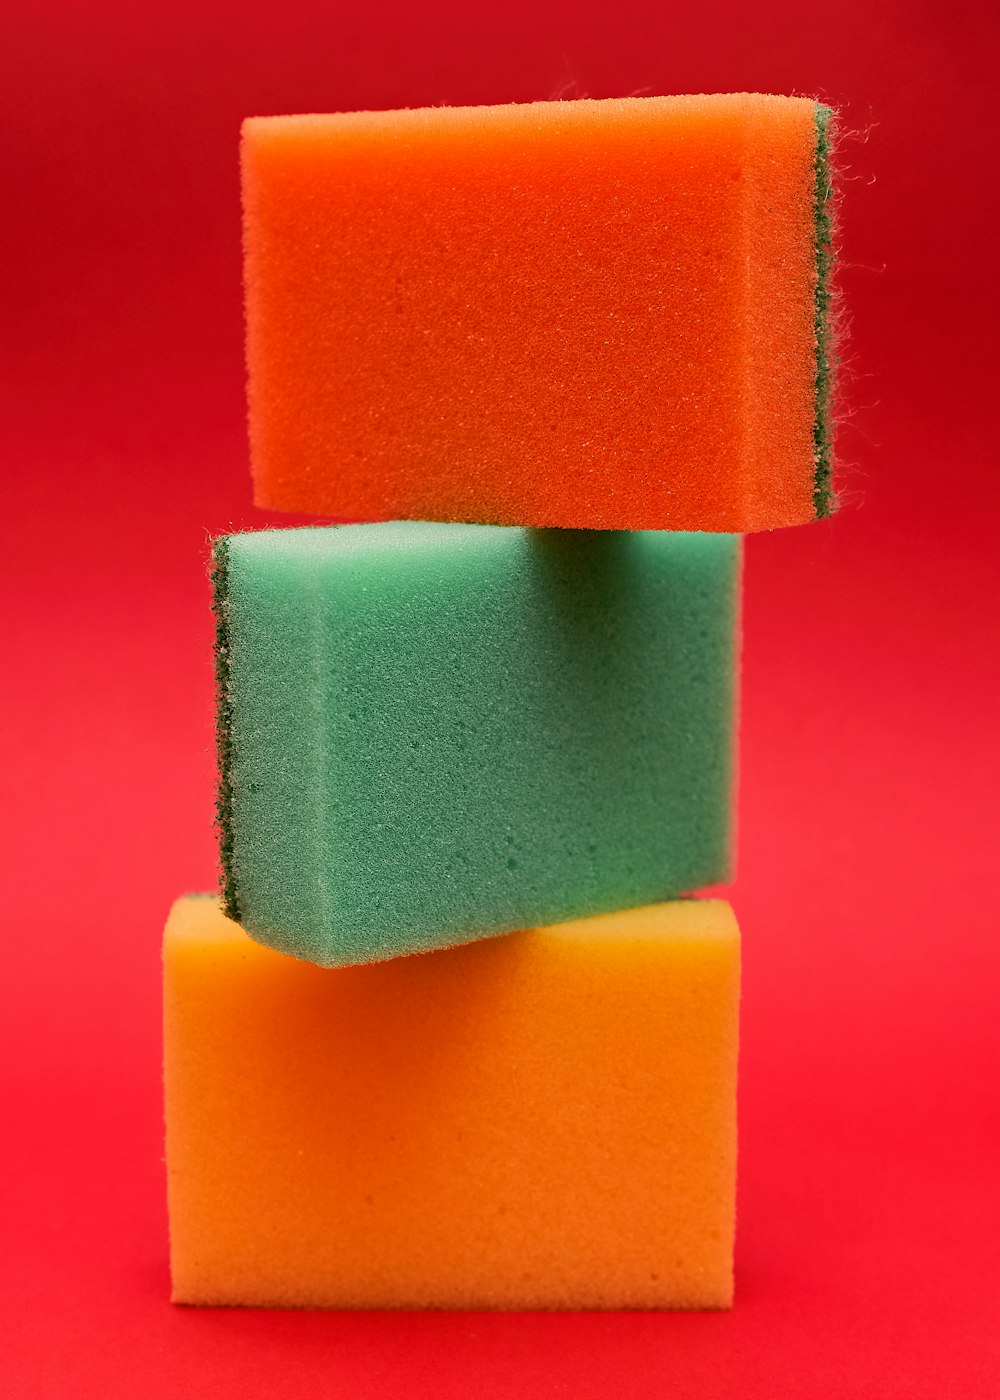 three sponges stacked on top of each other